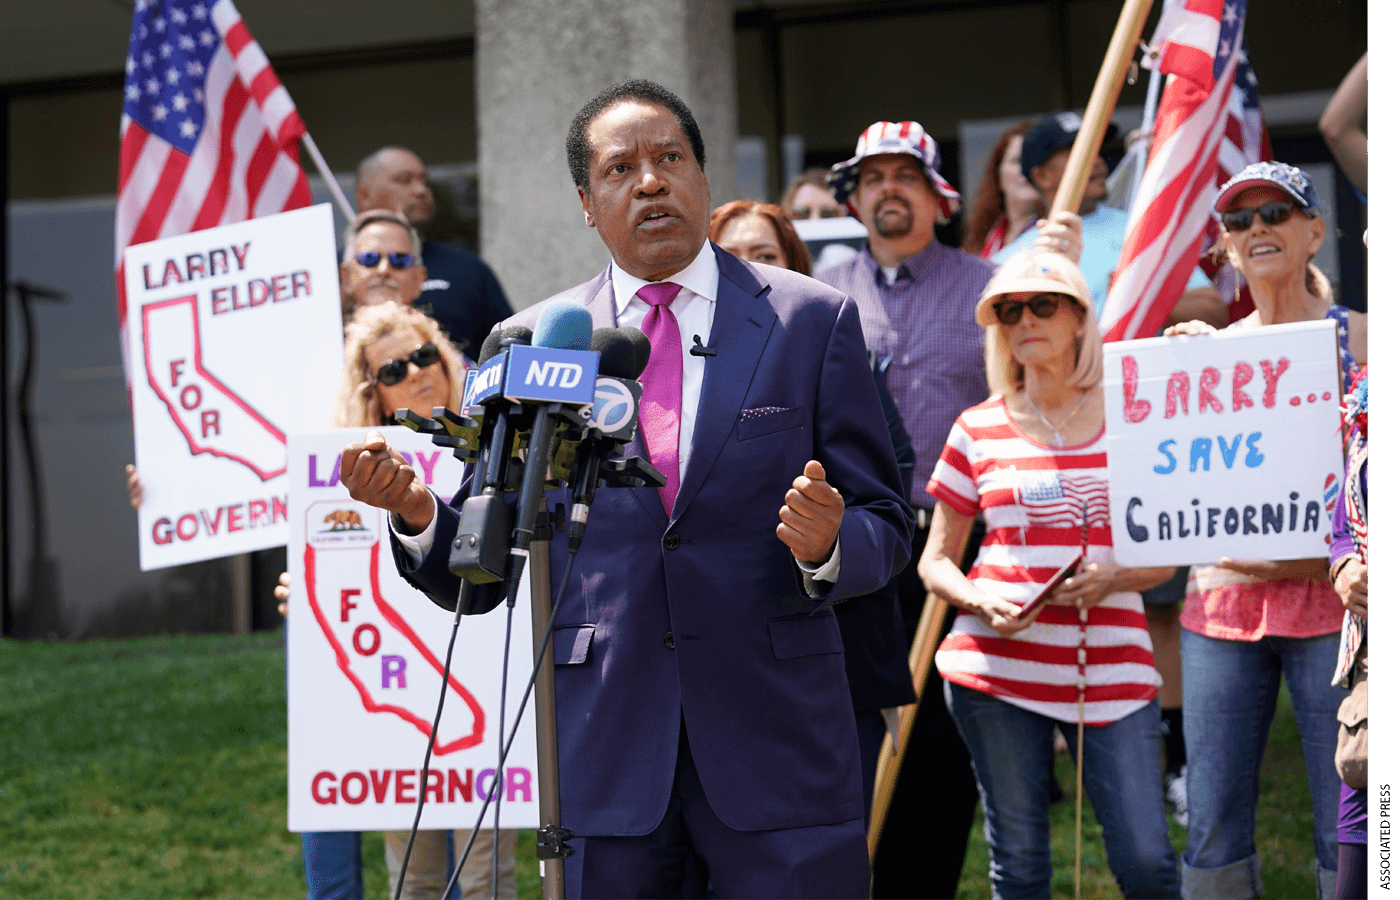 In this July 14, 2021, file photo, radio talk show host Larry Elder speaks to supporters during a campaign stop in Norwalk, Calif. Elder, who is running to replace Democratic Gov. Gavin Newsom in the Sept. 14 recall election, says he would erase state vaccine and mask mandates, is critical of gun control, opposes the minimum wage and disputes the notion of systemic racism in America.